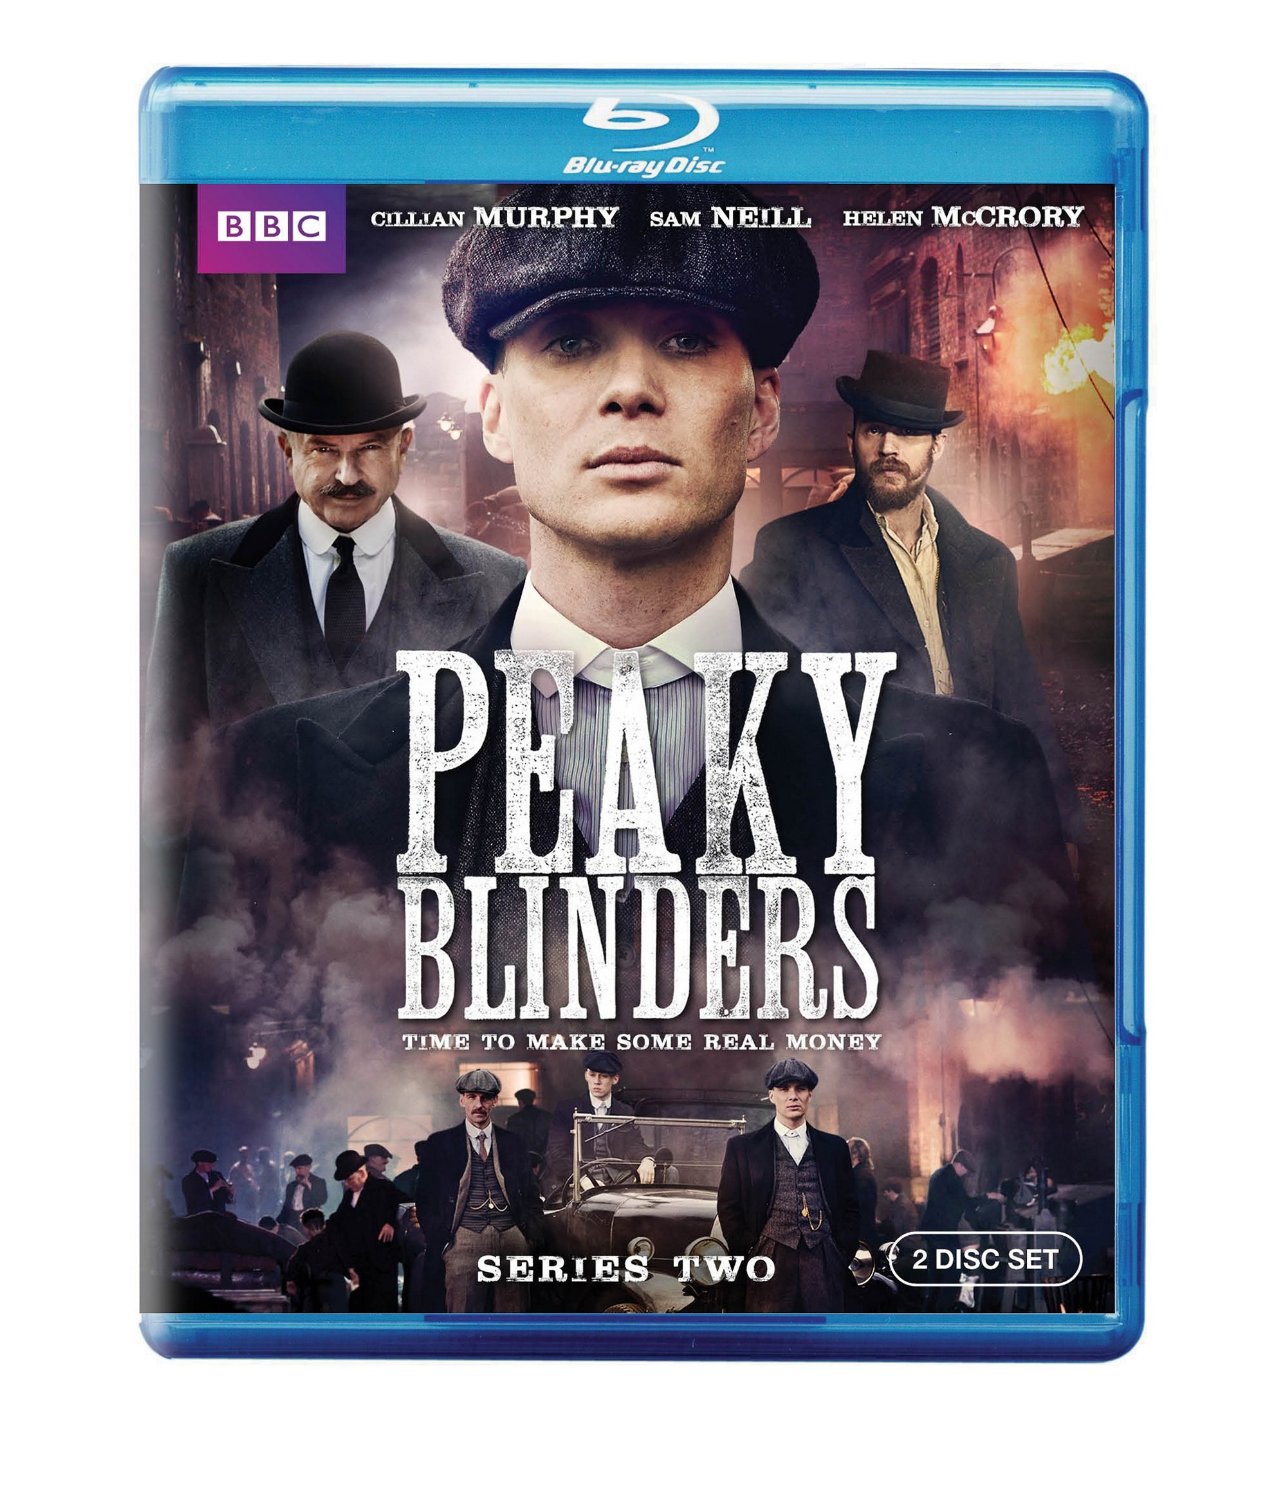 Dvd And Blu Ray Peaky Blinders Season 2 Bbc The Entertainment Factor 